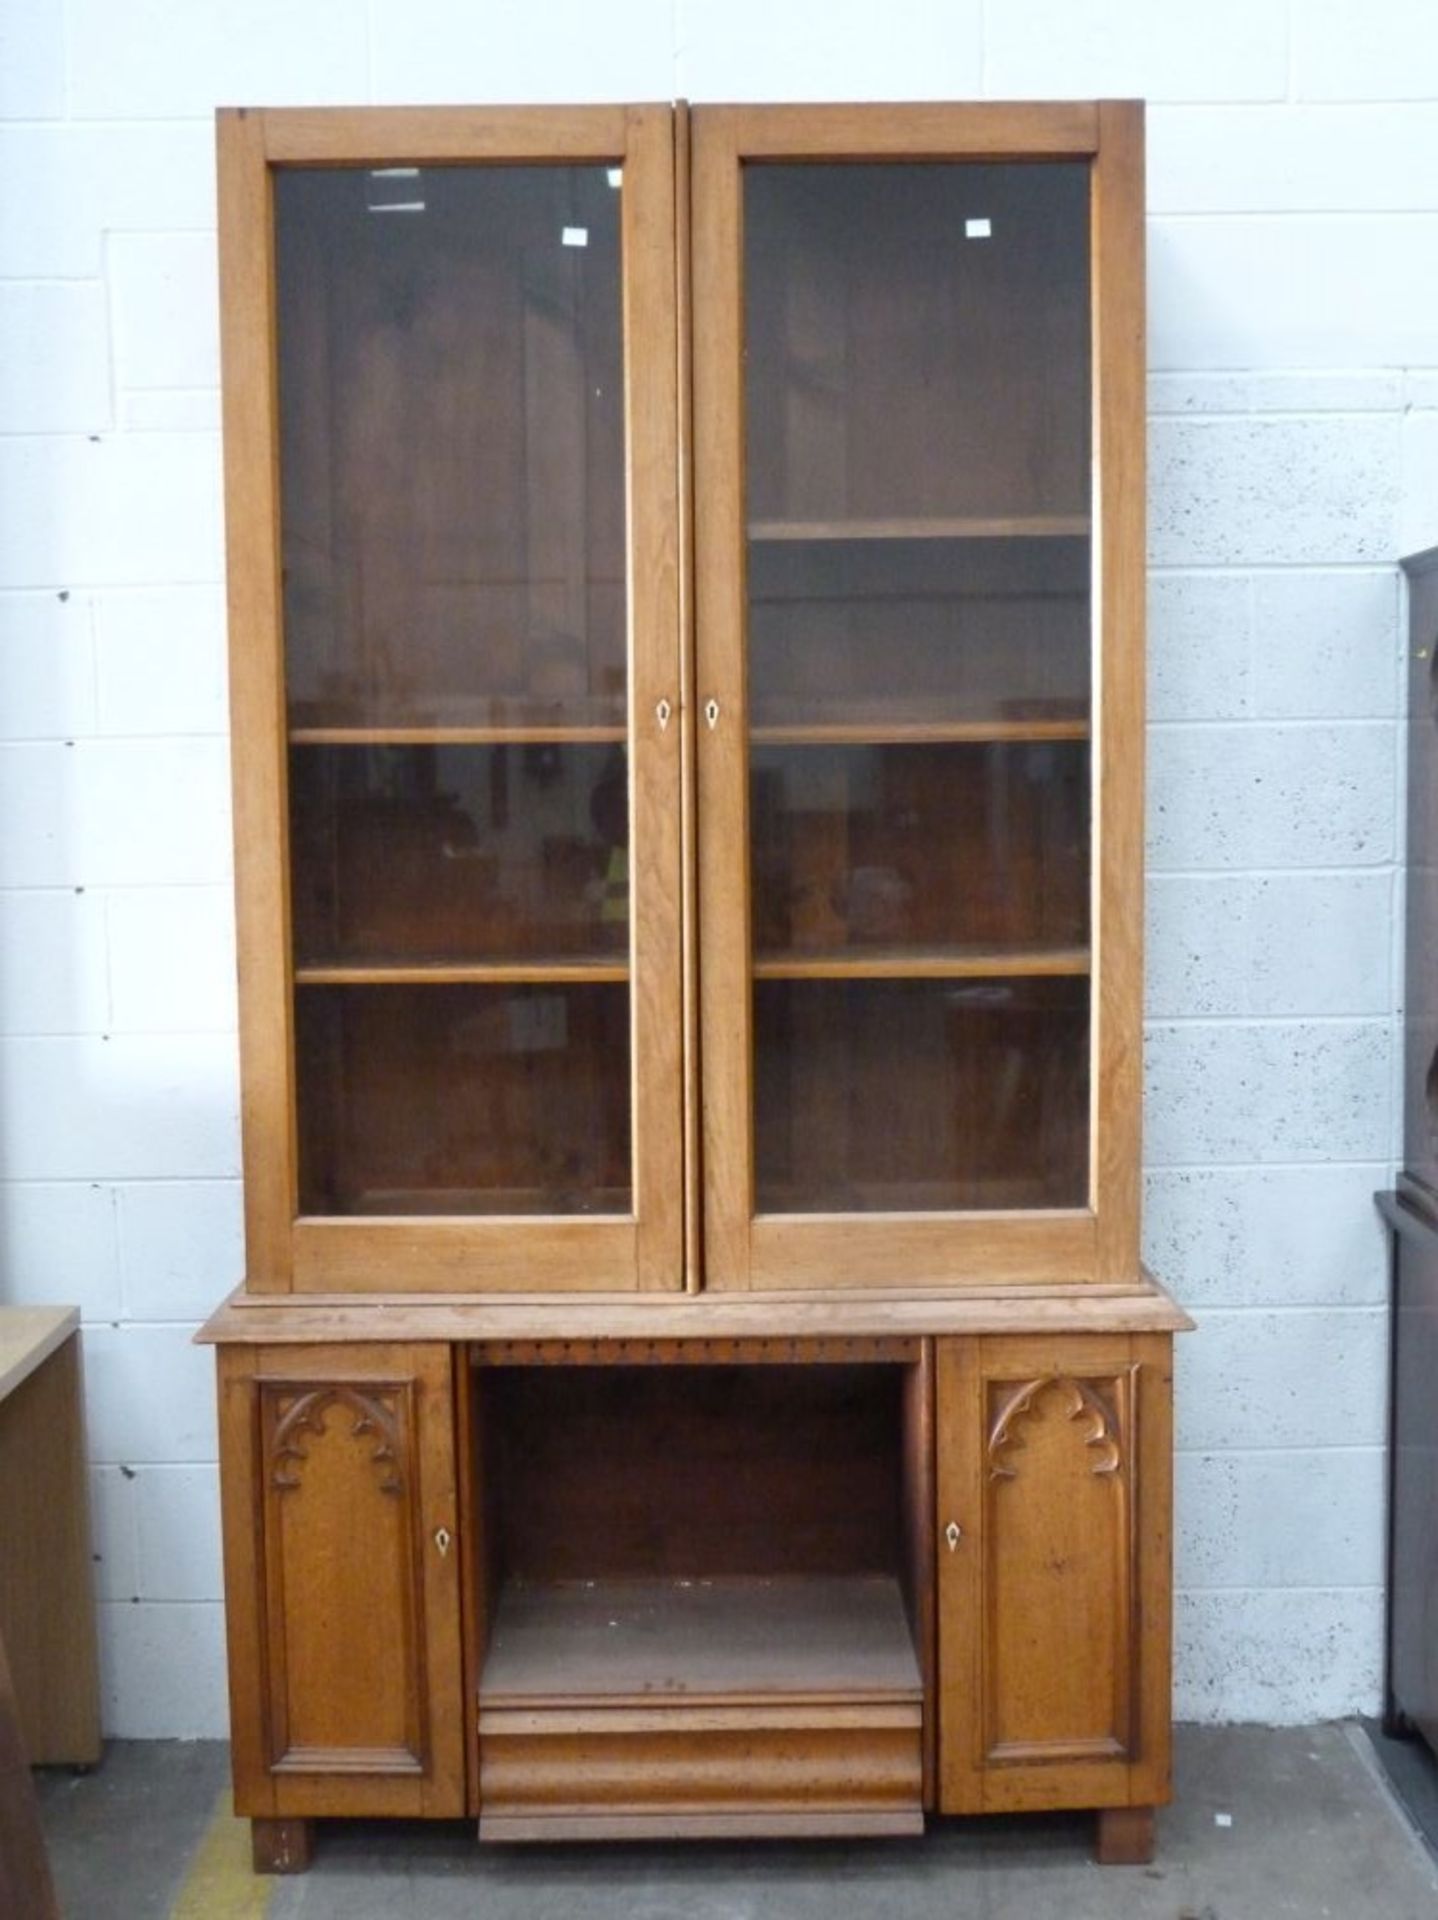 A Bookcase Cabinet with two columns of adjustable shelves behind locking (with key) glass doors